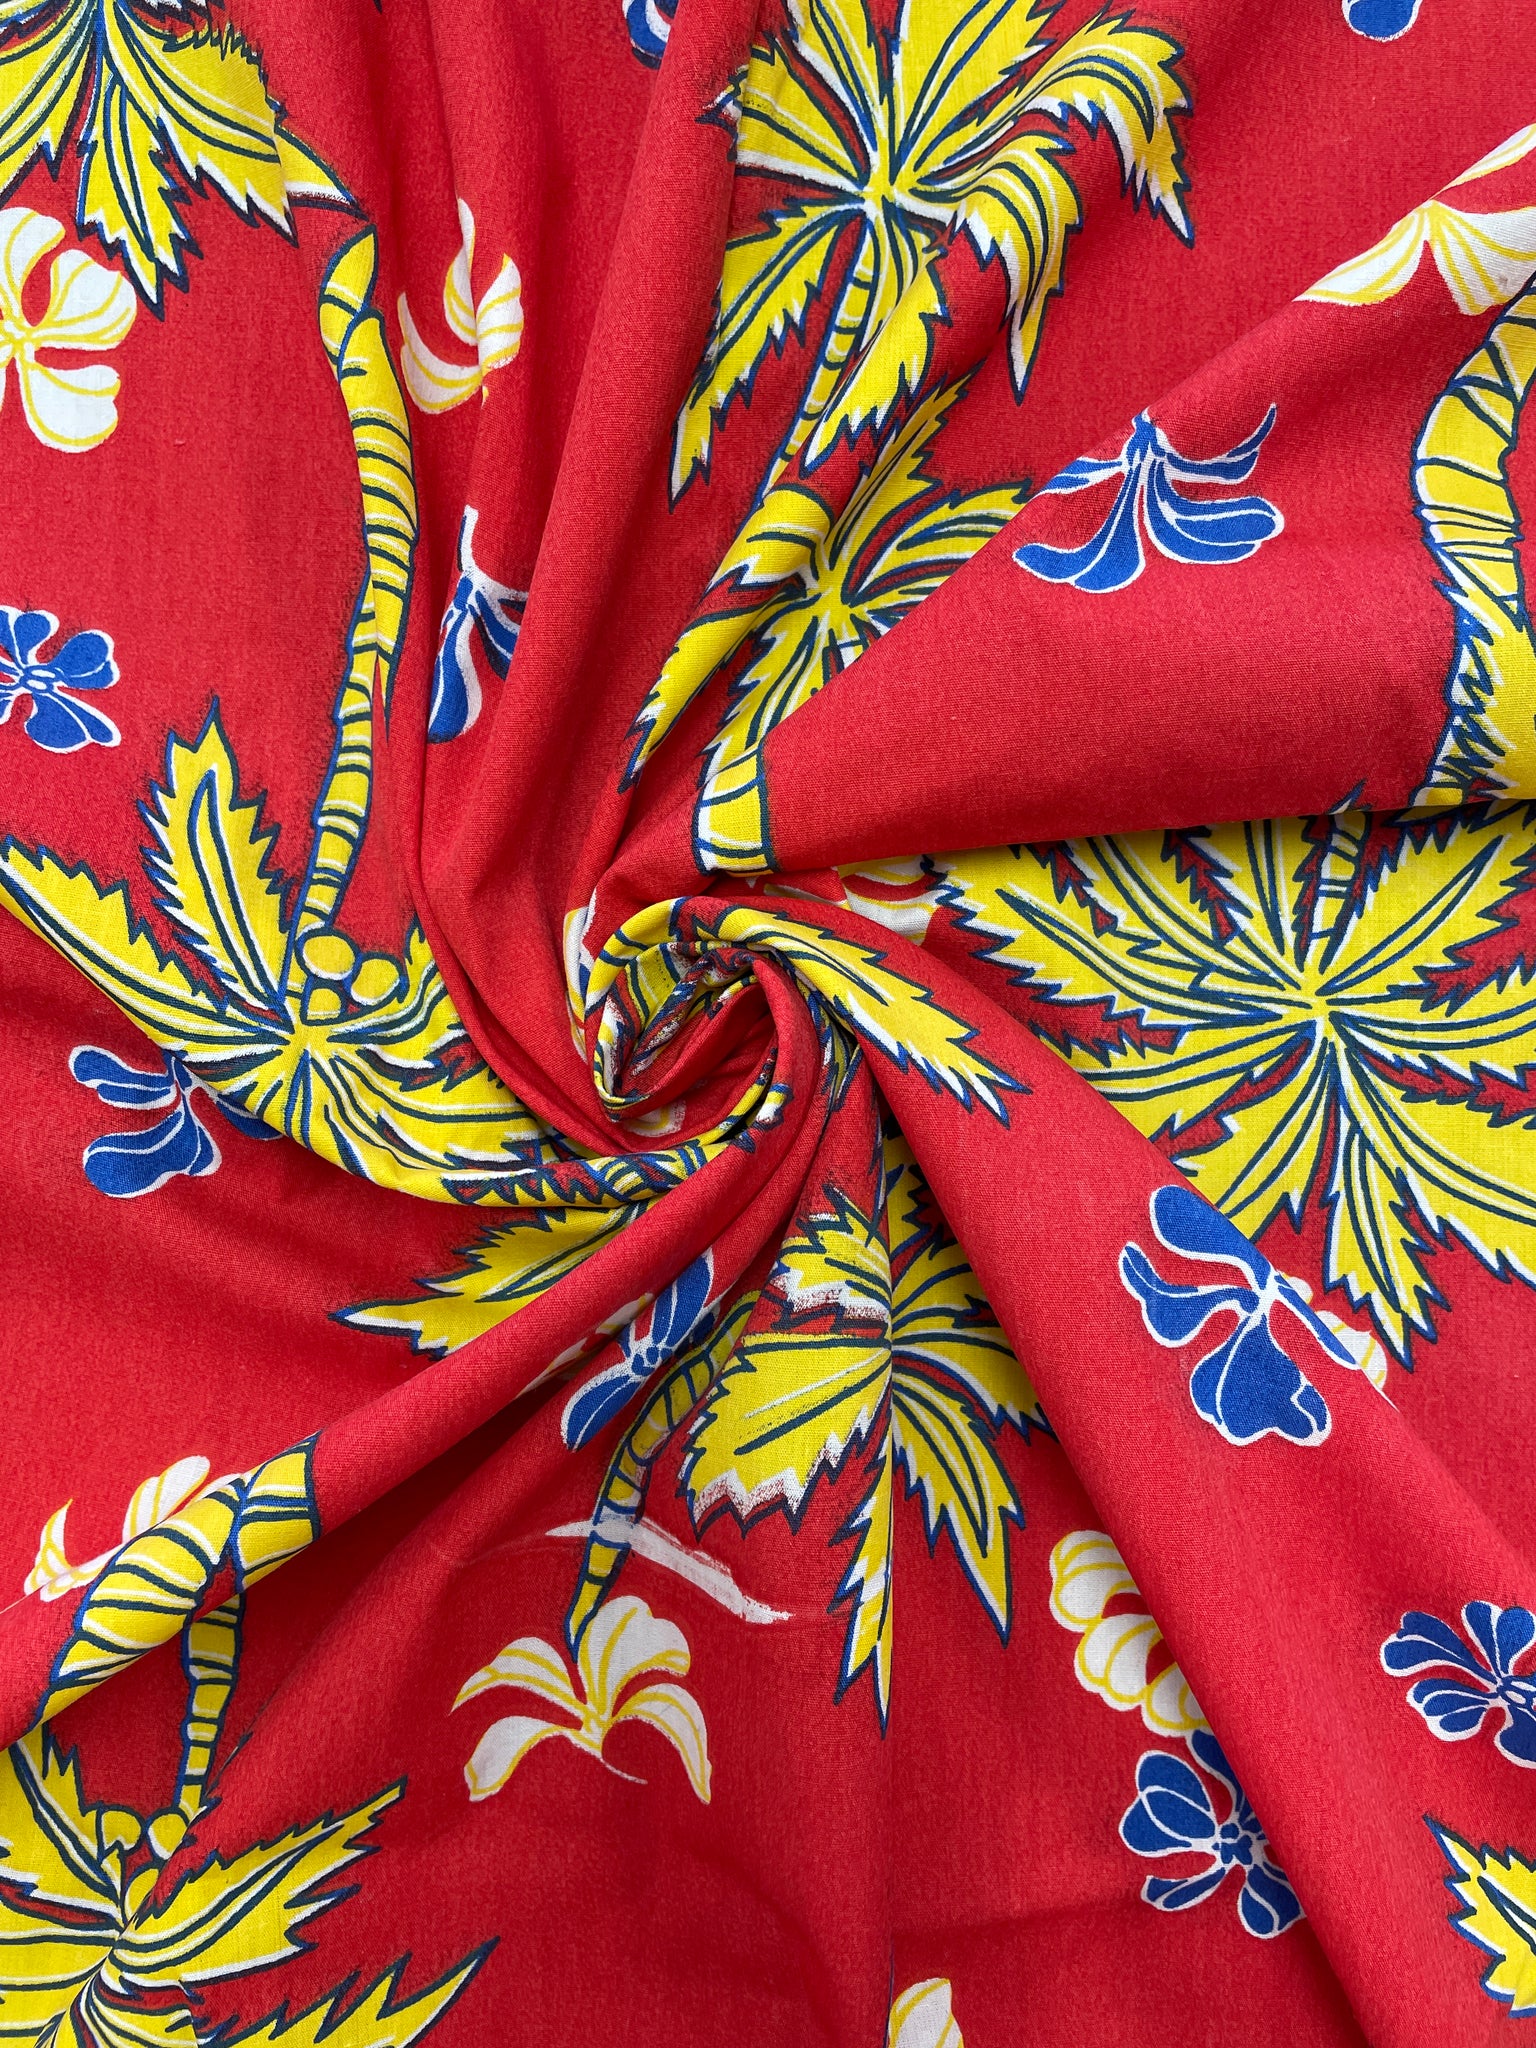 2 1/2 YD Cotton Vintage - Red with Yellow Palm Trees